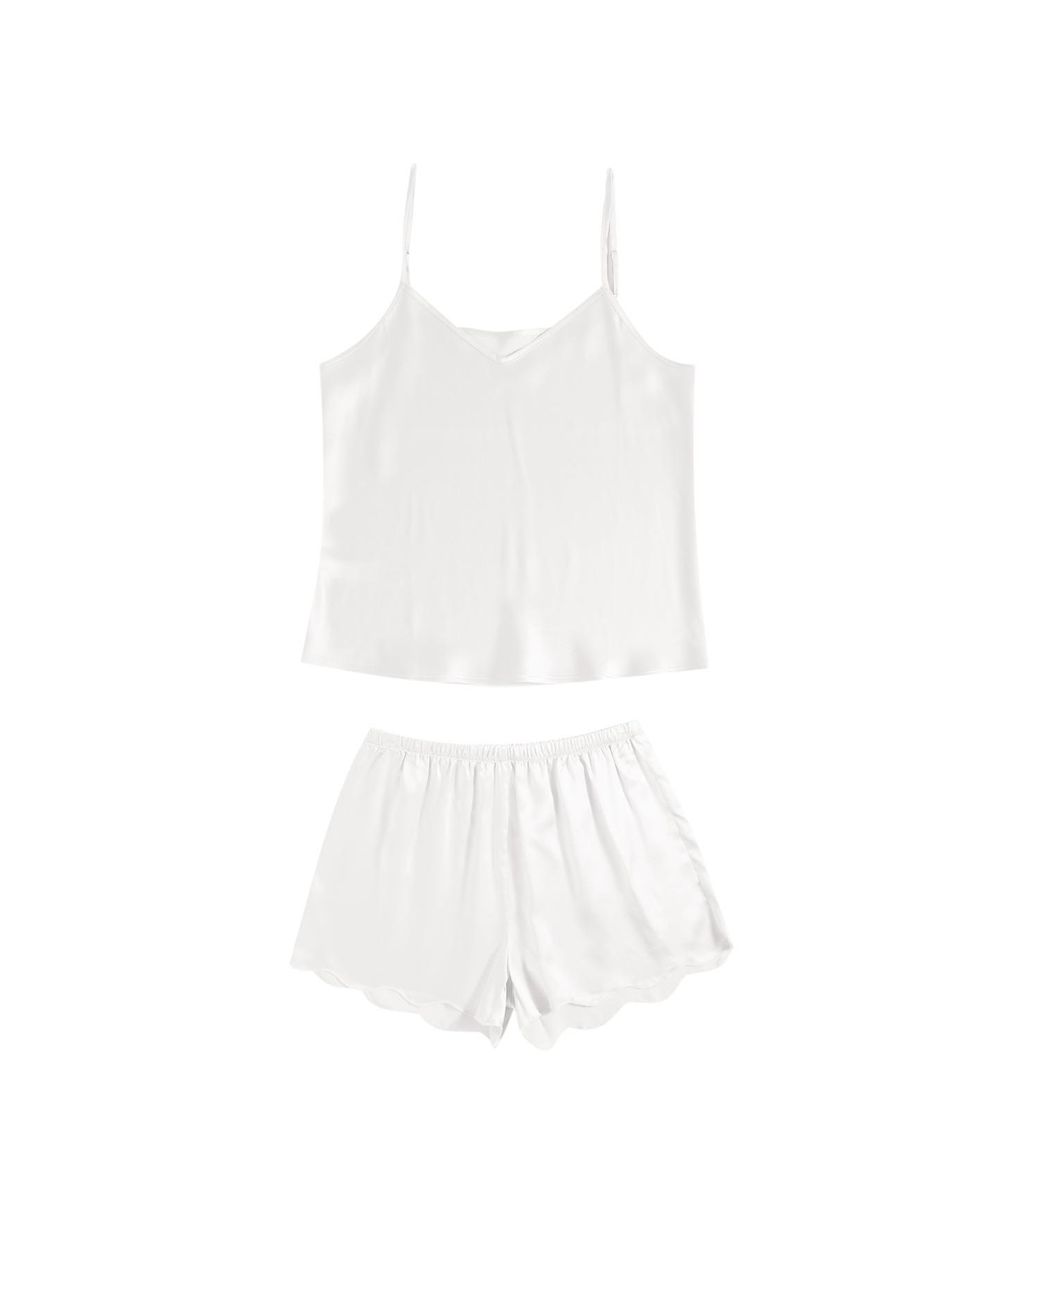 White Silky Soft Short and Cami Set